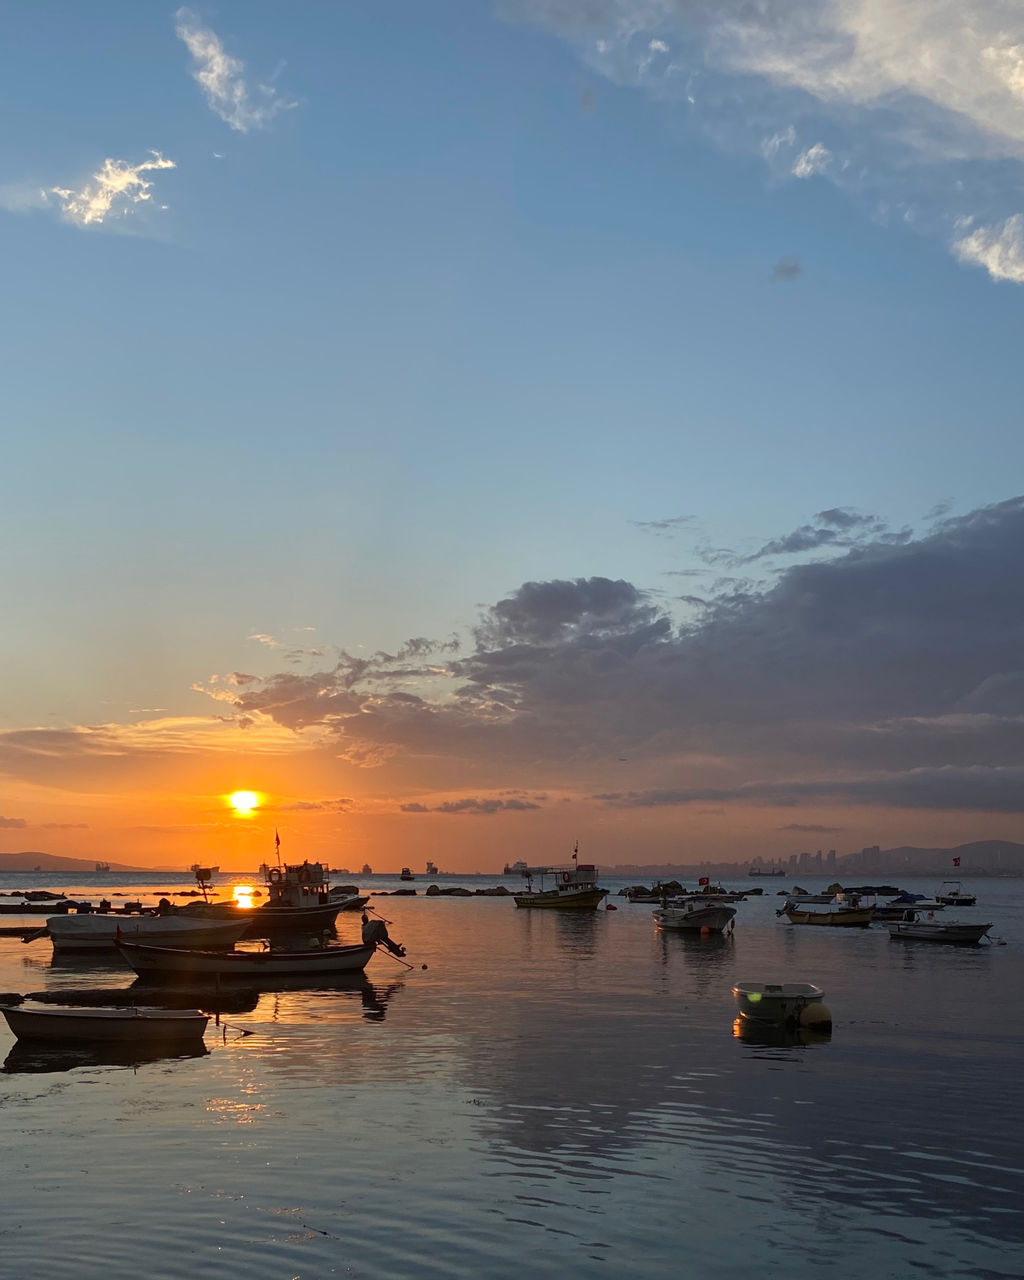 VIEW OF BOATS IN SEA AGAINST SKY DURING SUNSET